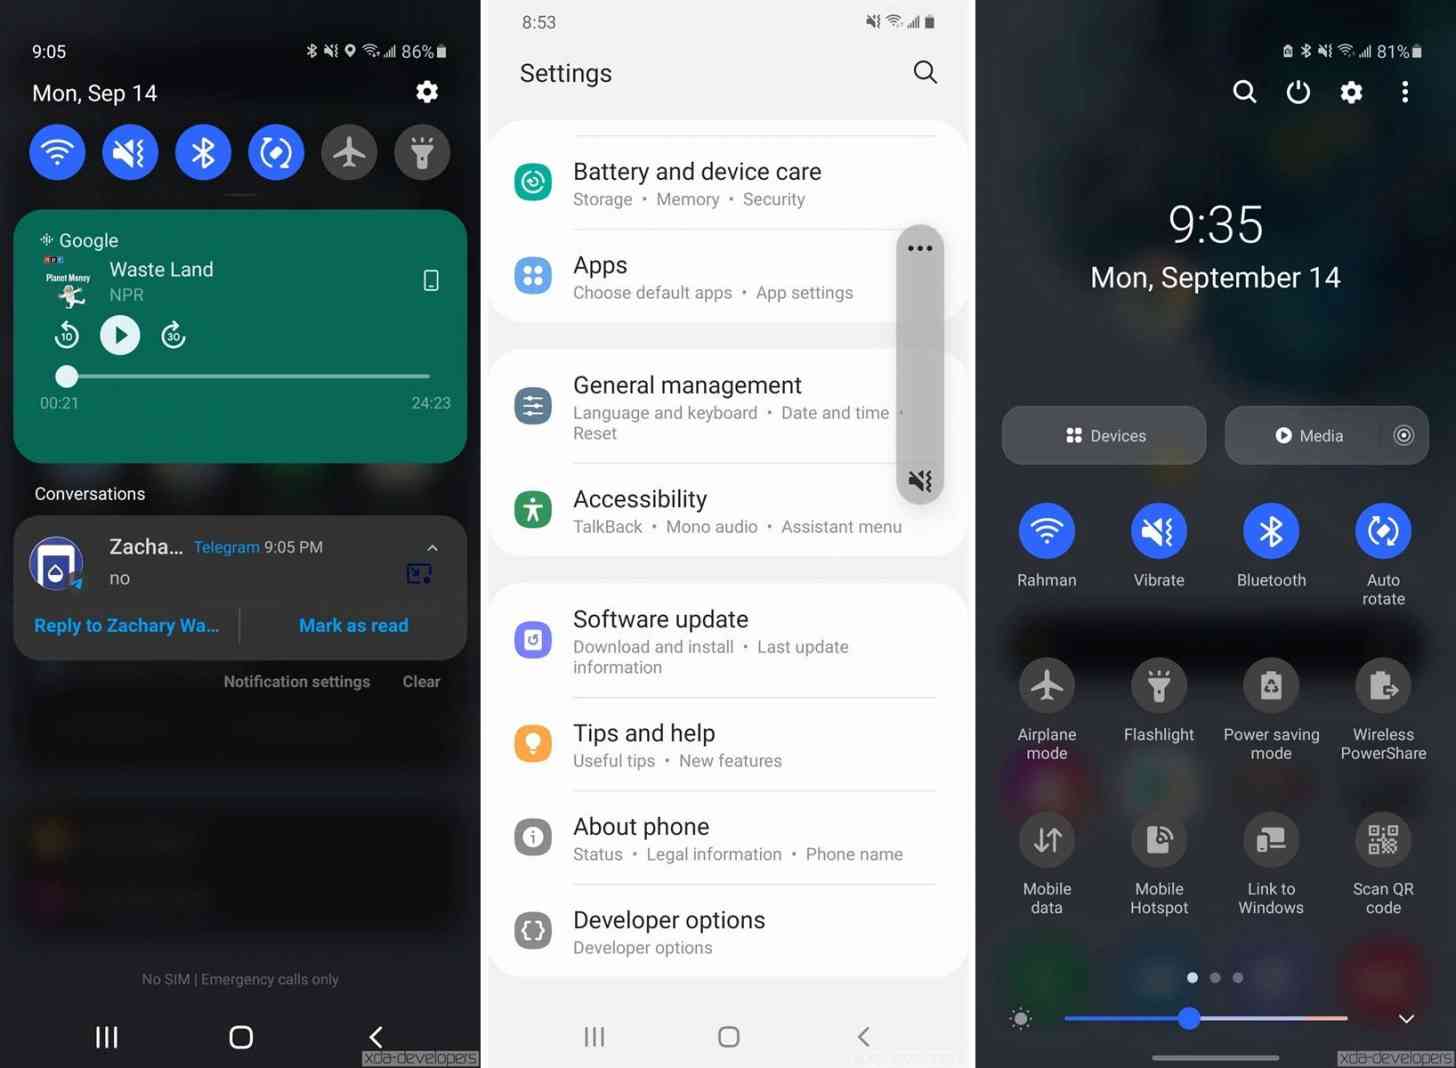 Samsung One UI 3 features